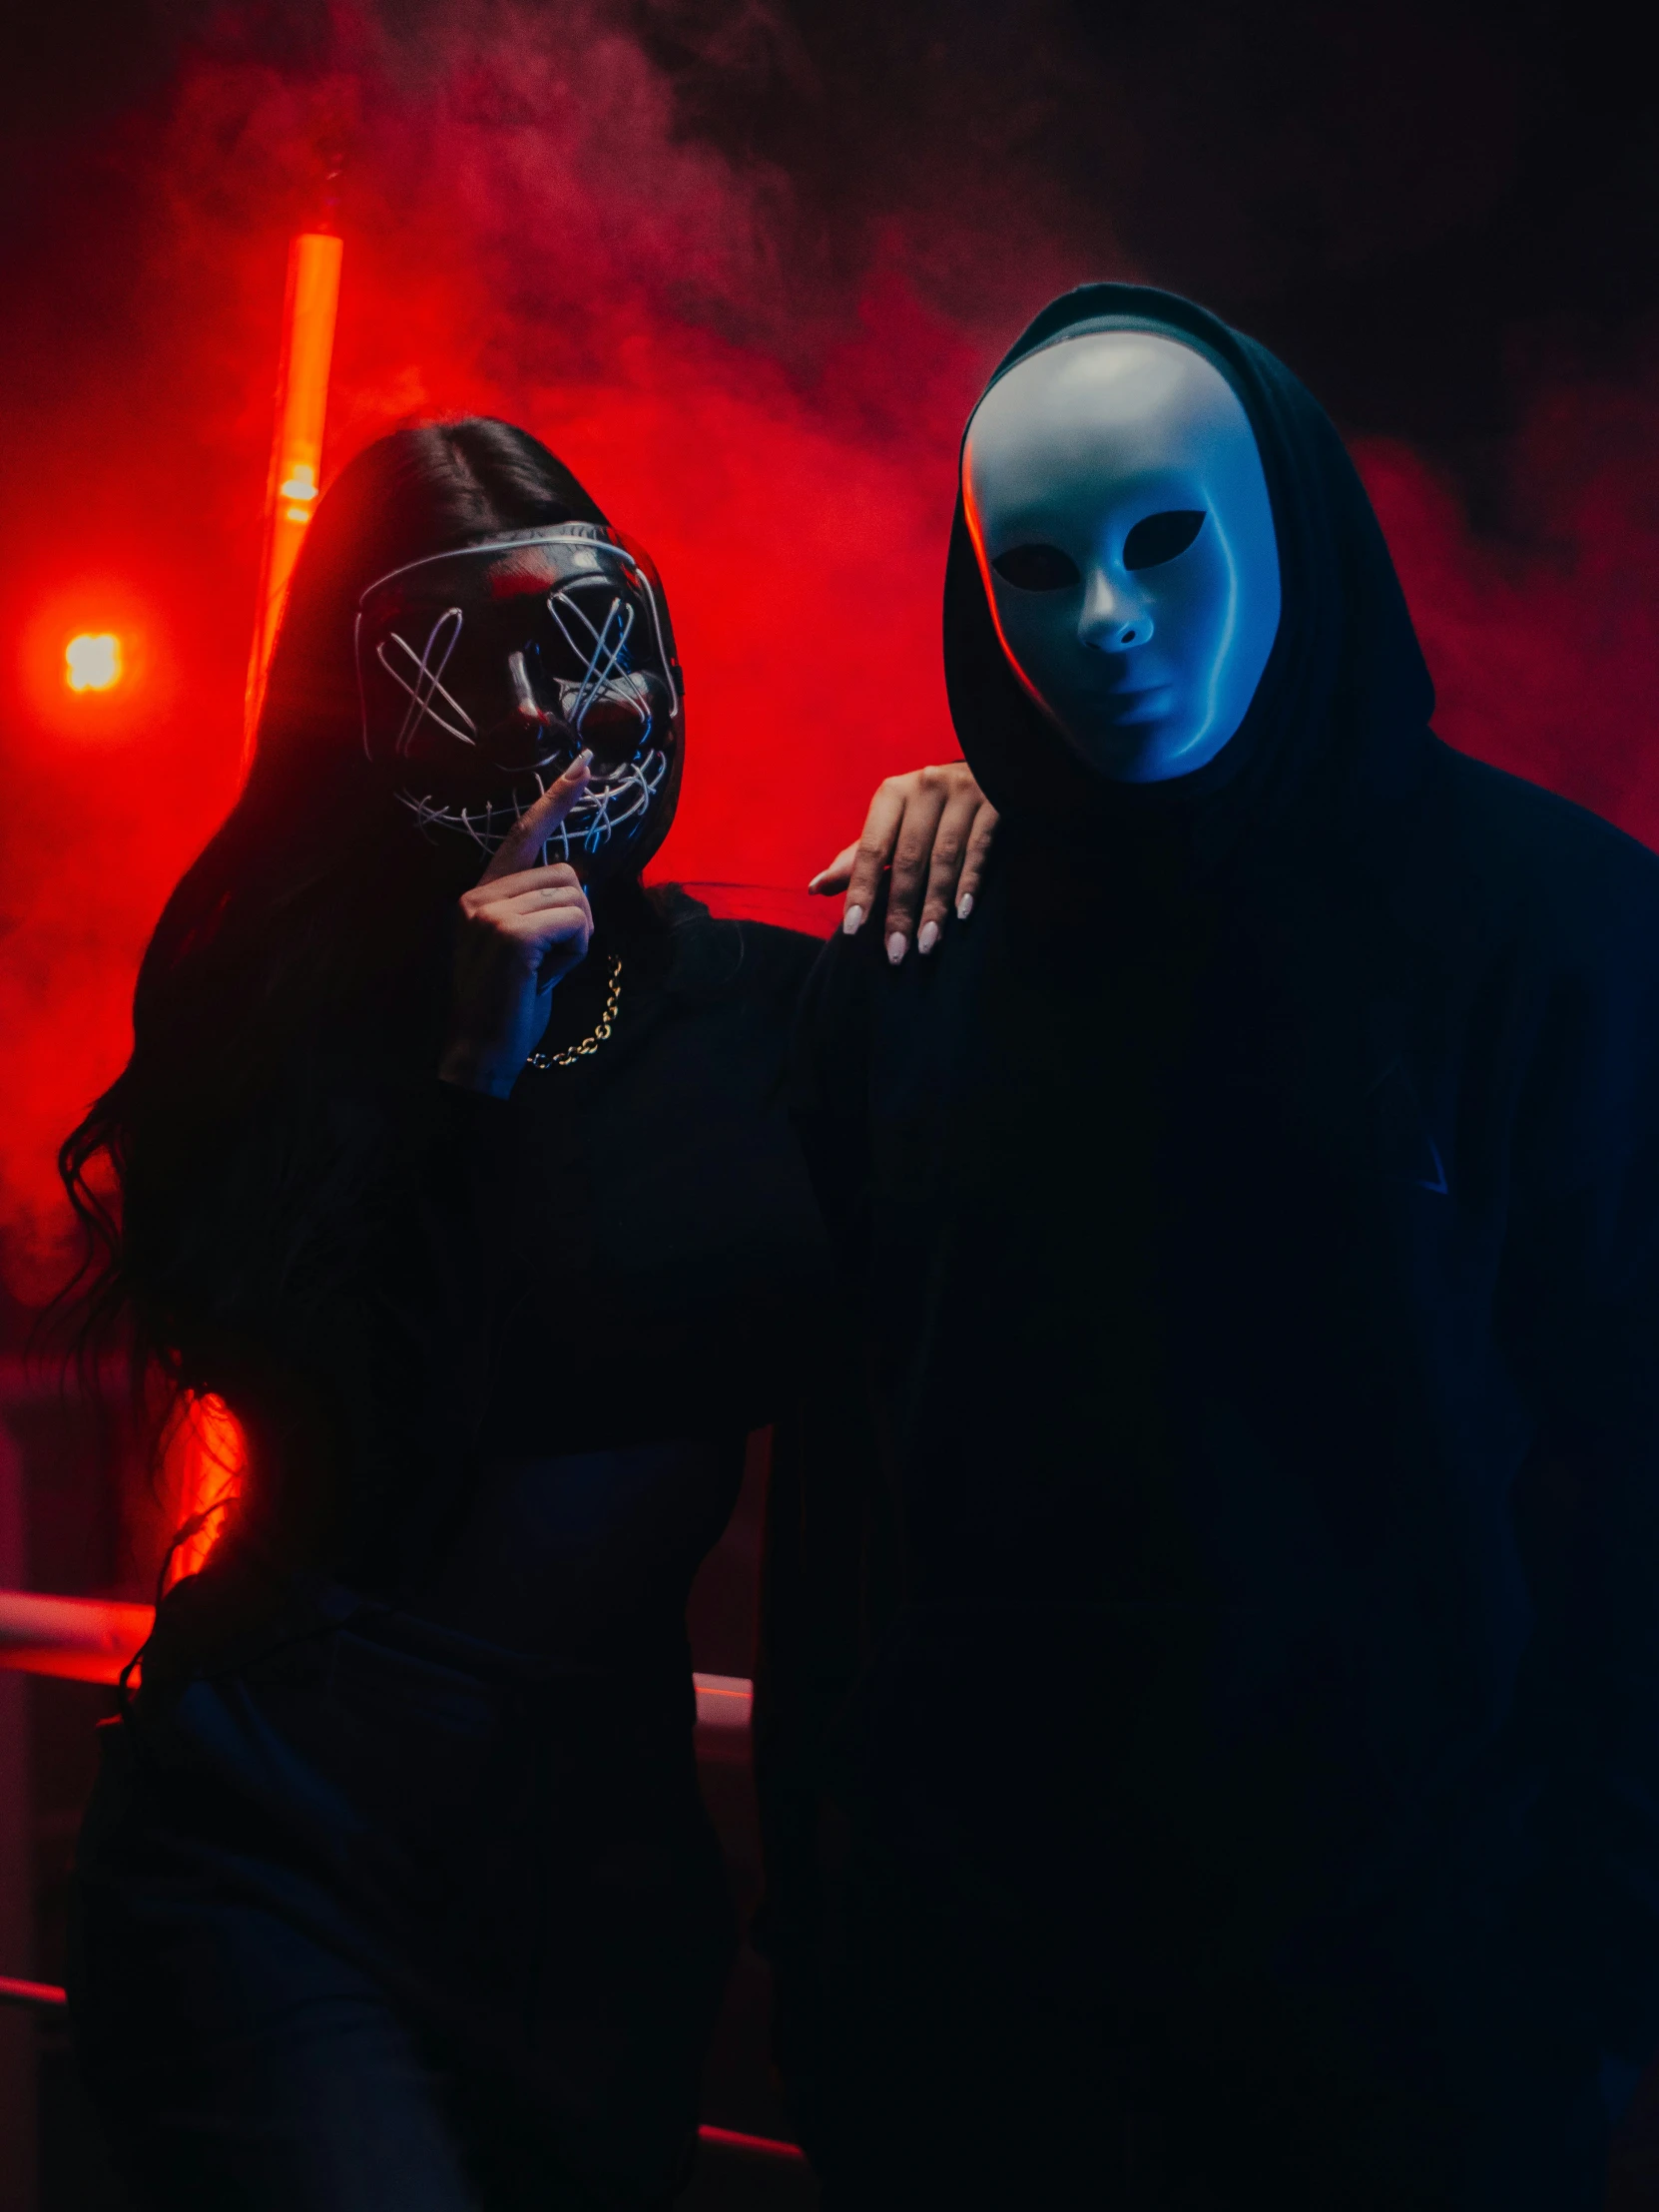 a man and woman wearing masks stand side by side